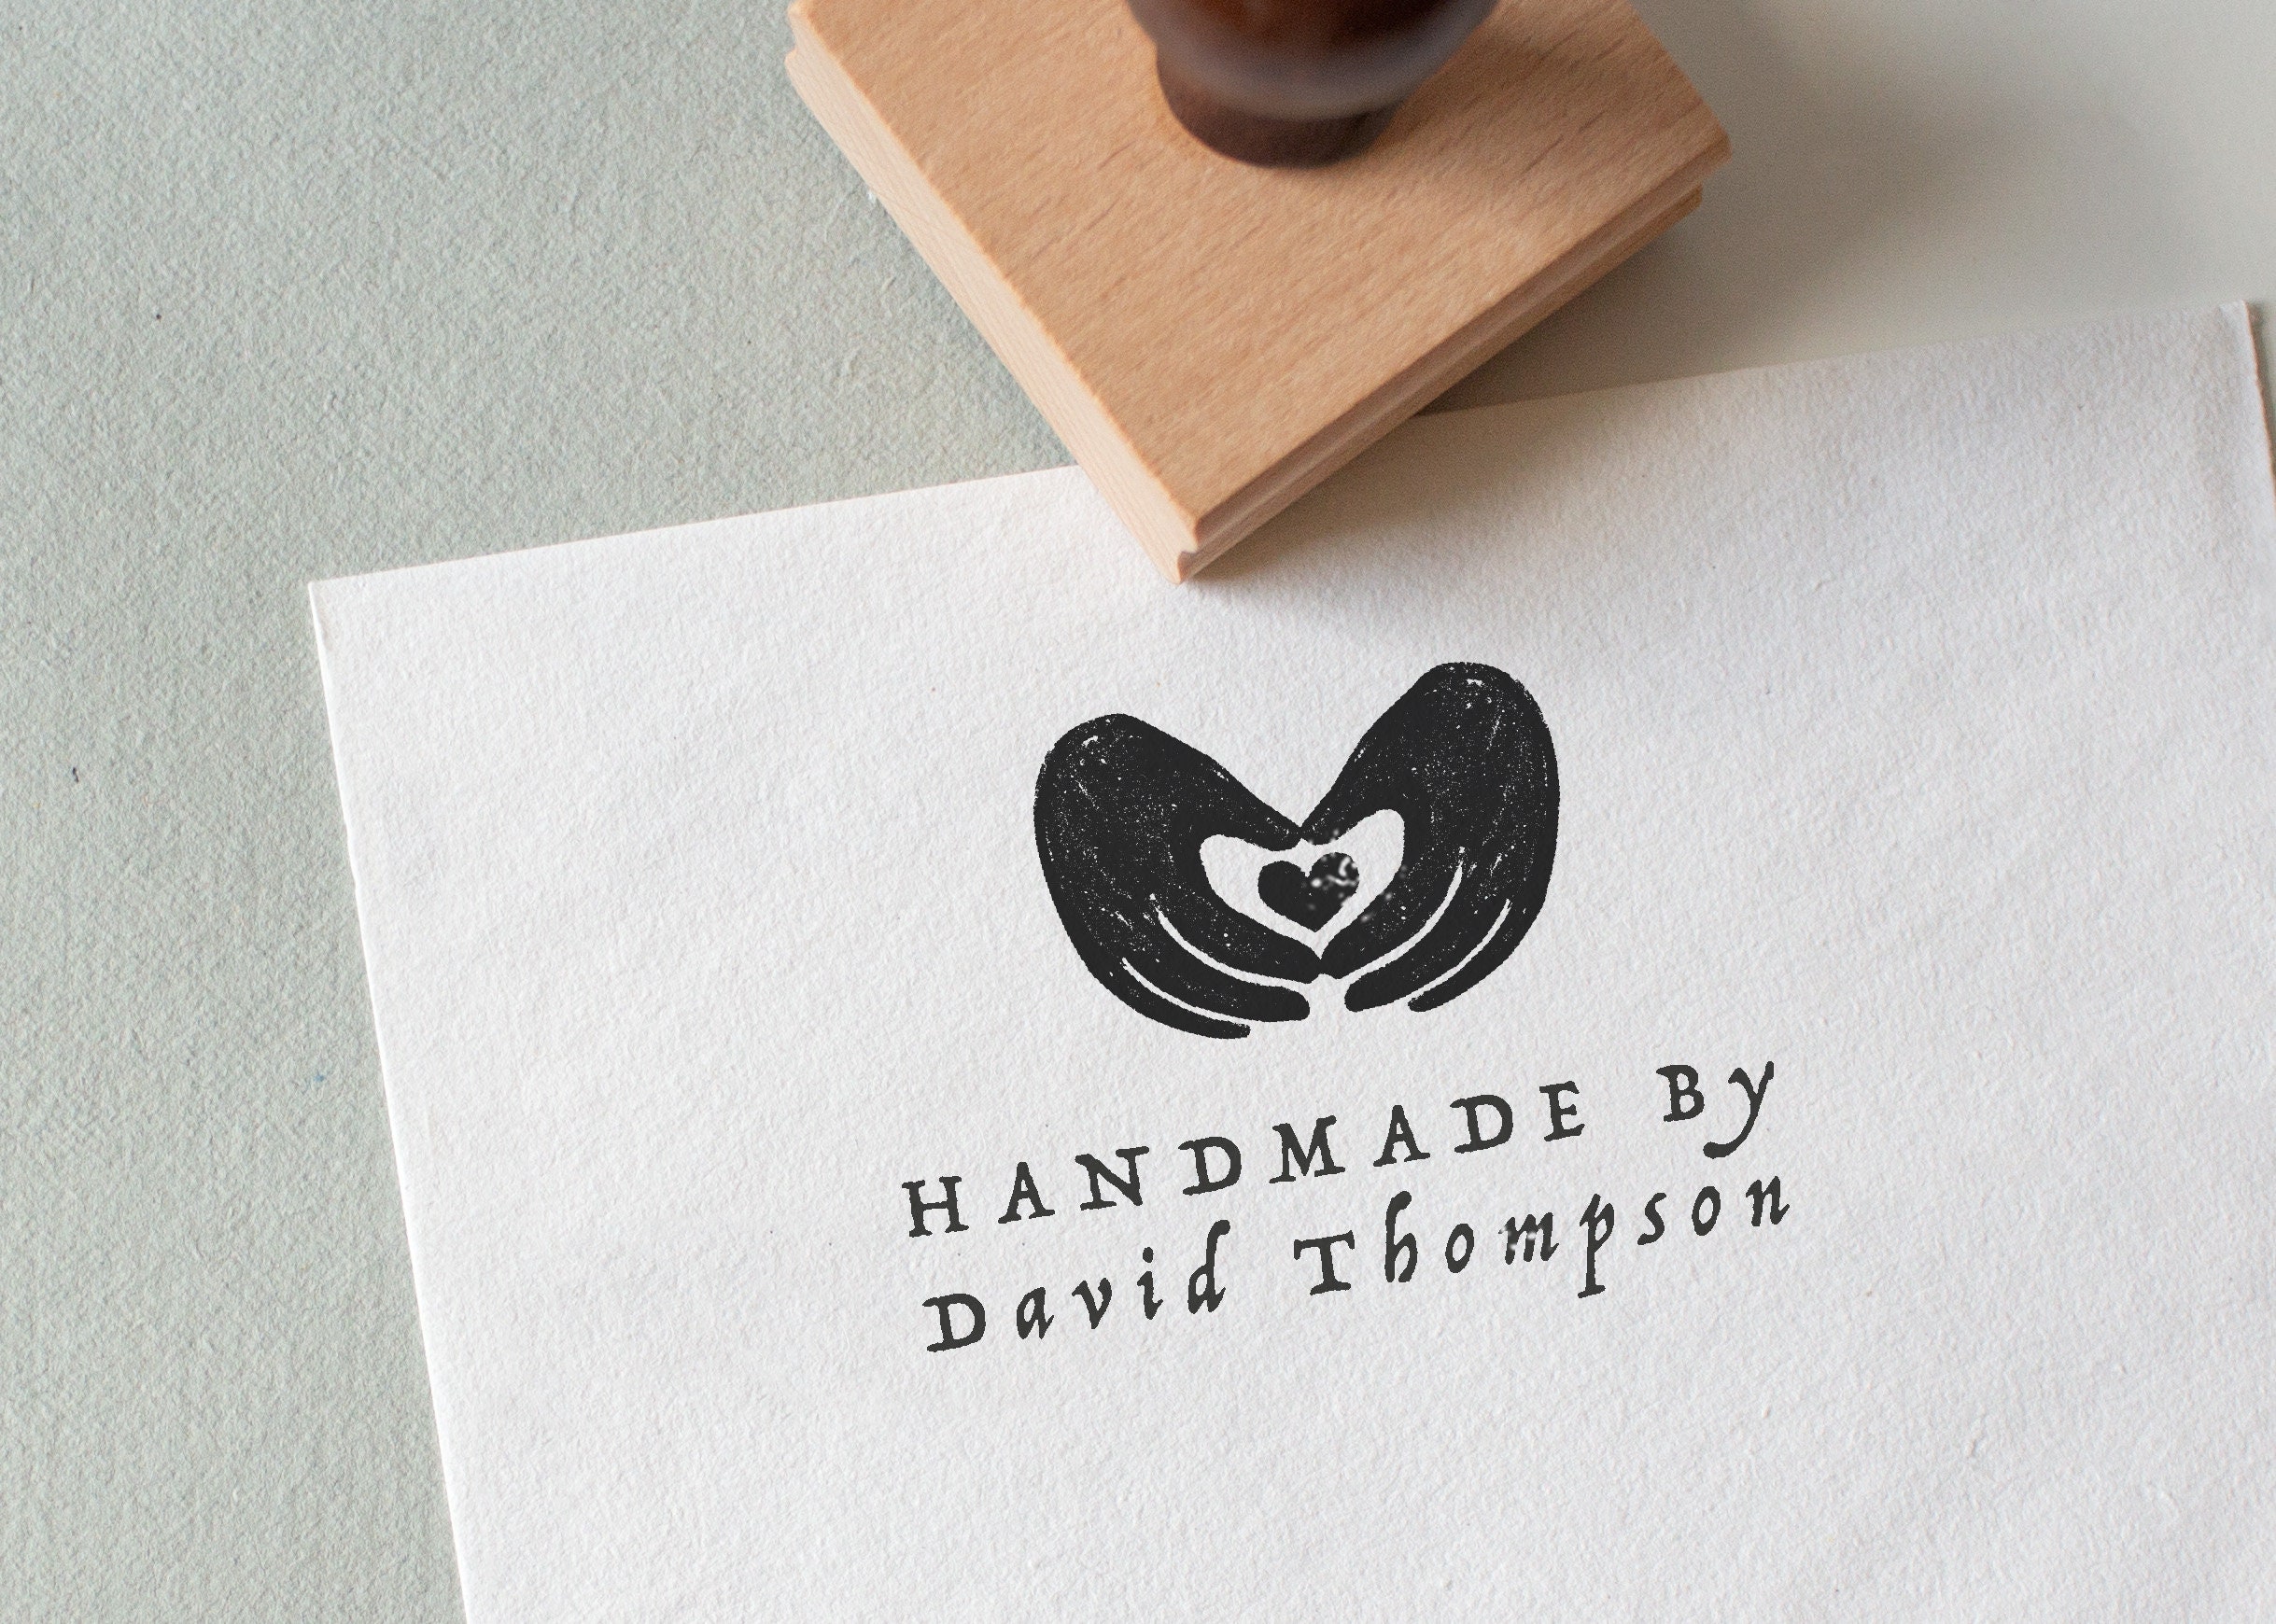 Custom Logo Stamp, Personalized Small Business Stamp With Ink Pad, Small  Medium Large Size Logo Stamper, Customized Fabric Tag Rubber Stamp 